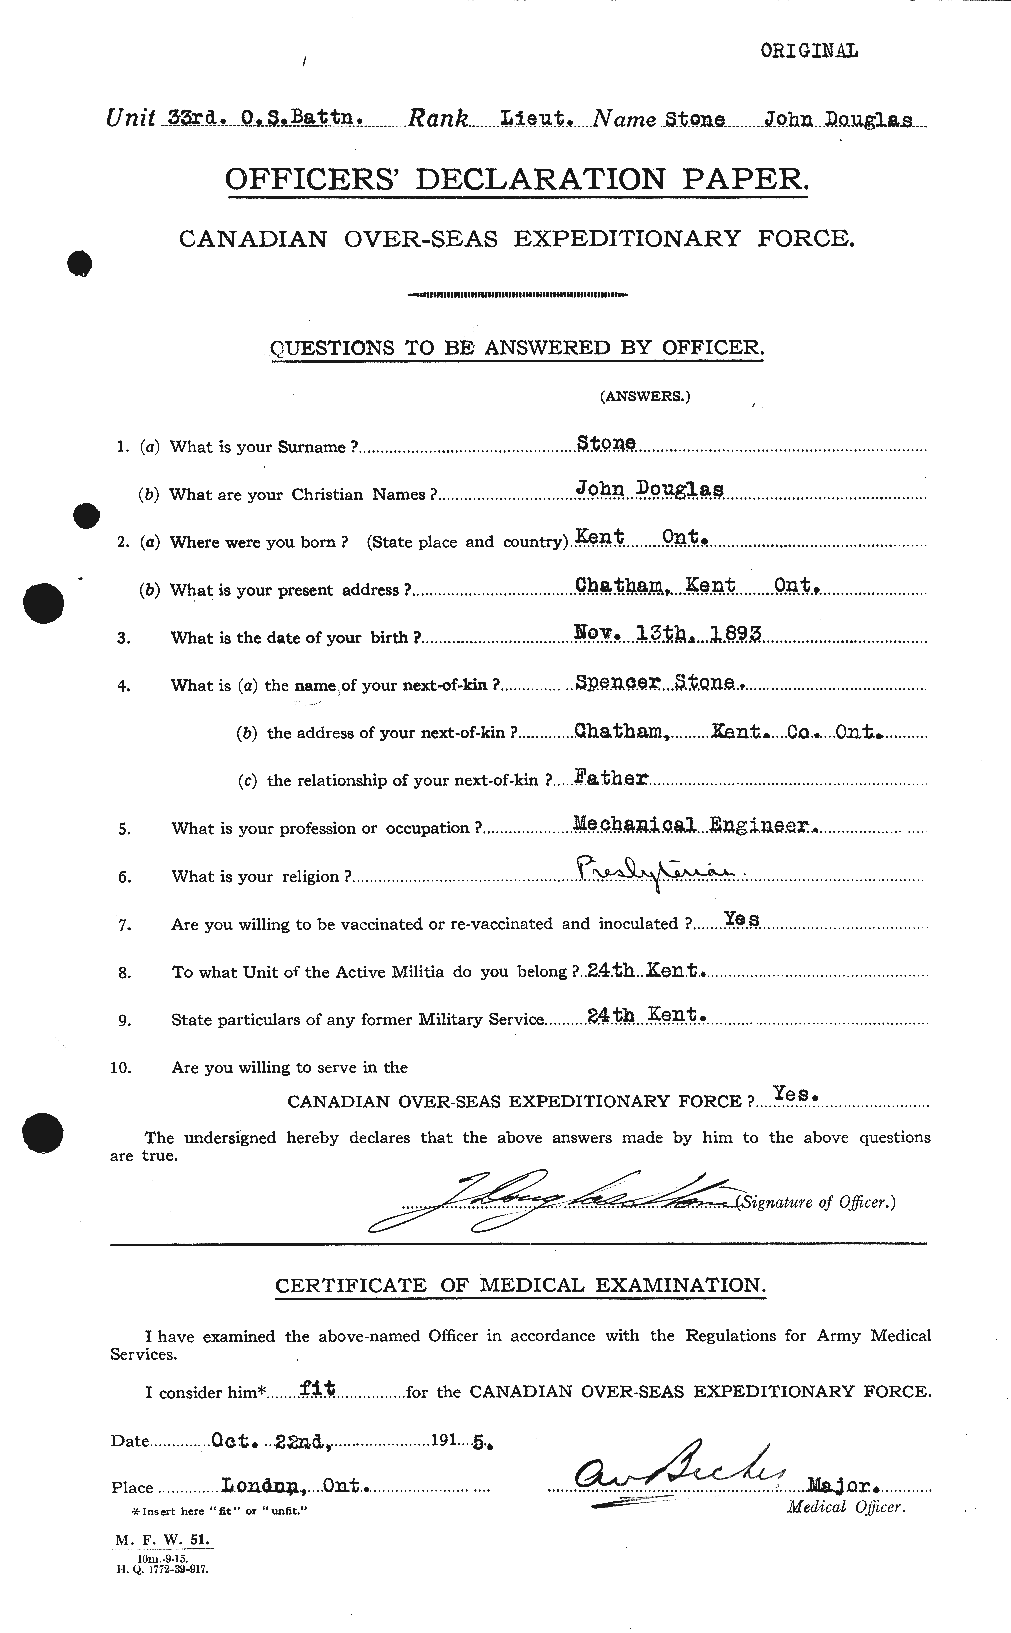 Personnel Records of the First World War - CEF 121942a